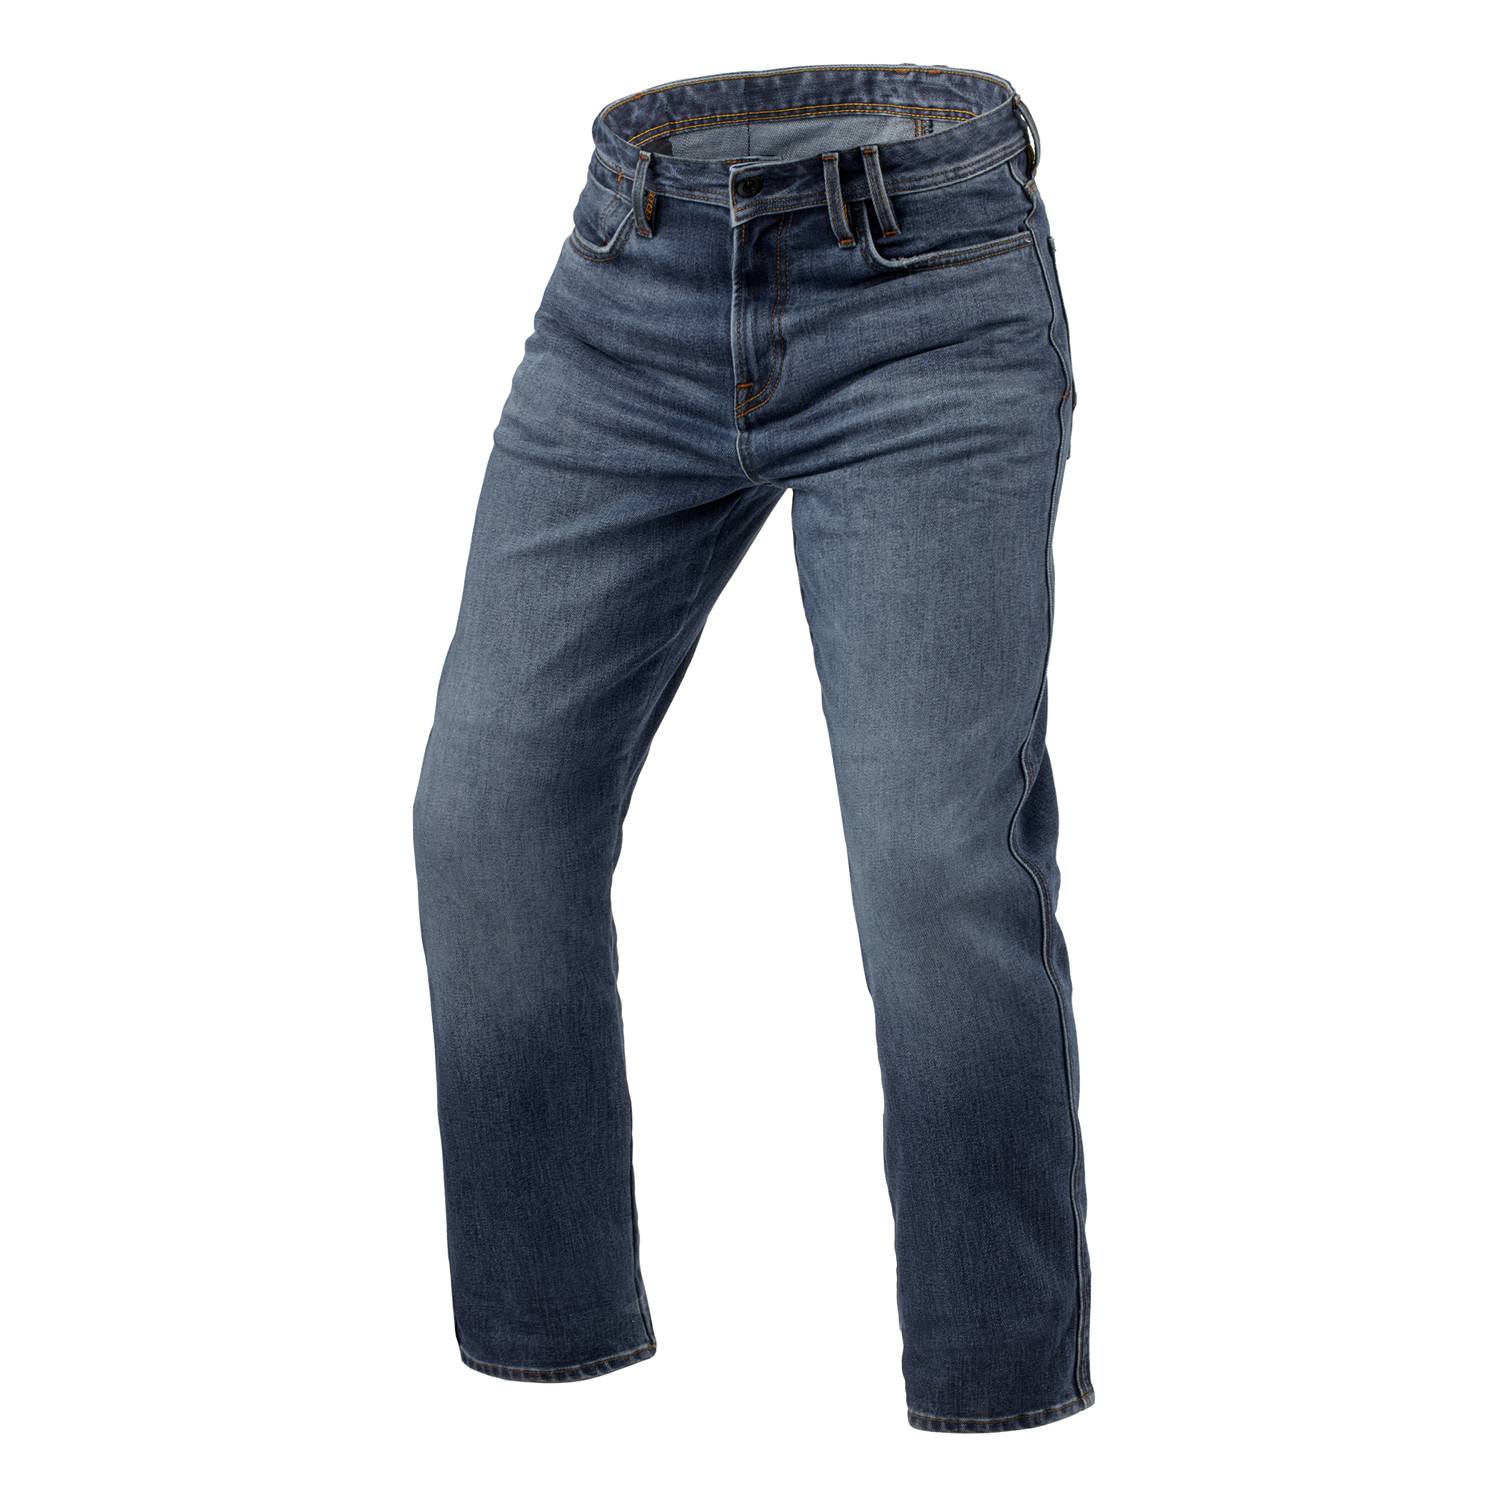 Image of EU REV'IT! Jeans Lombard 3 RF Mid Blue Stone L32 Motorcycle Jeans Taille L32/W31